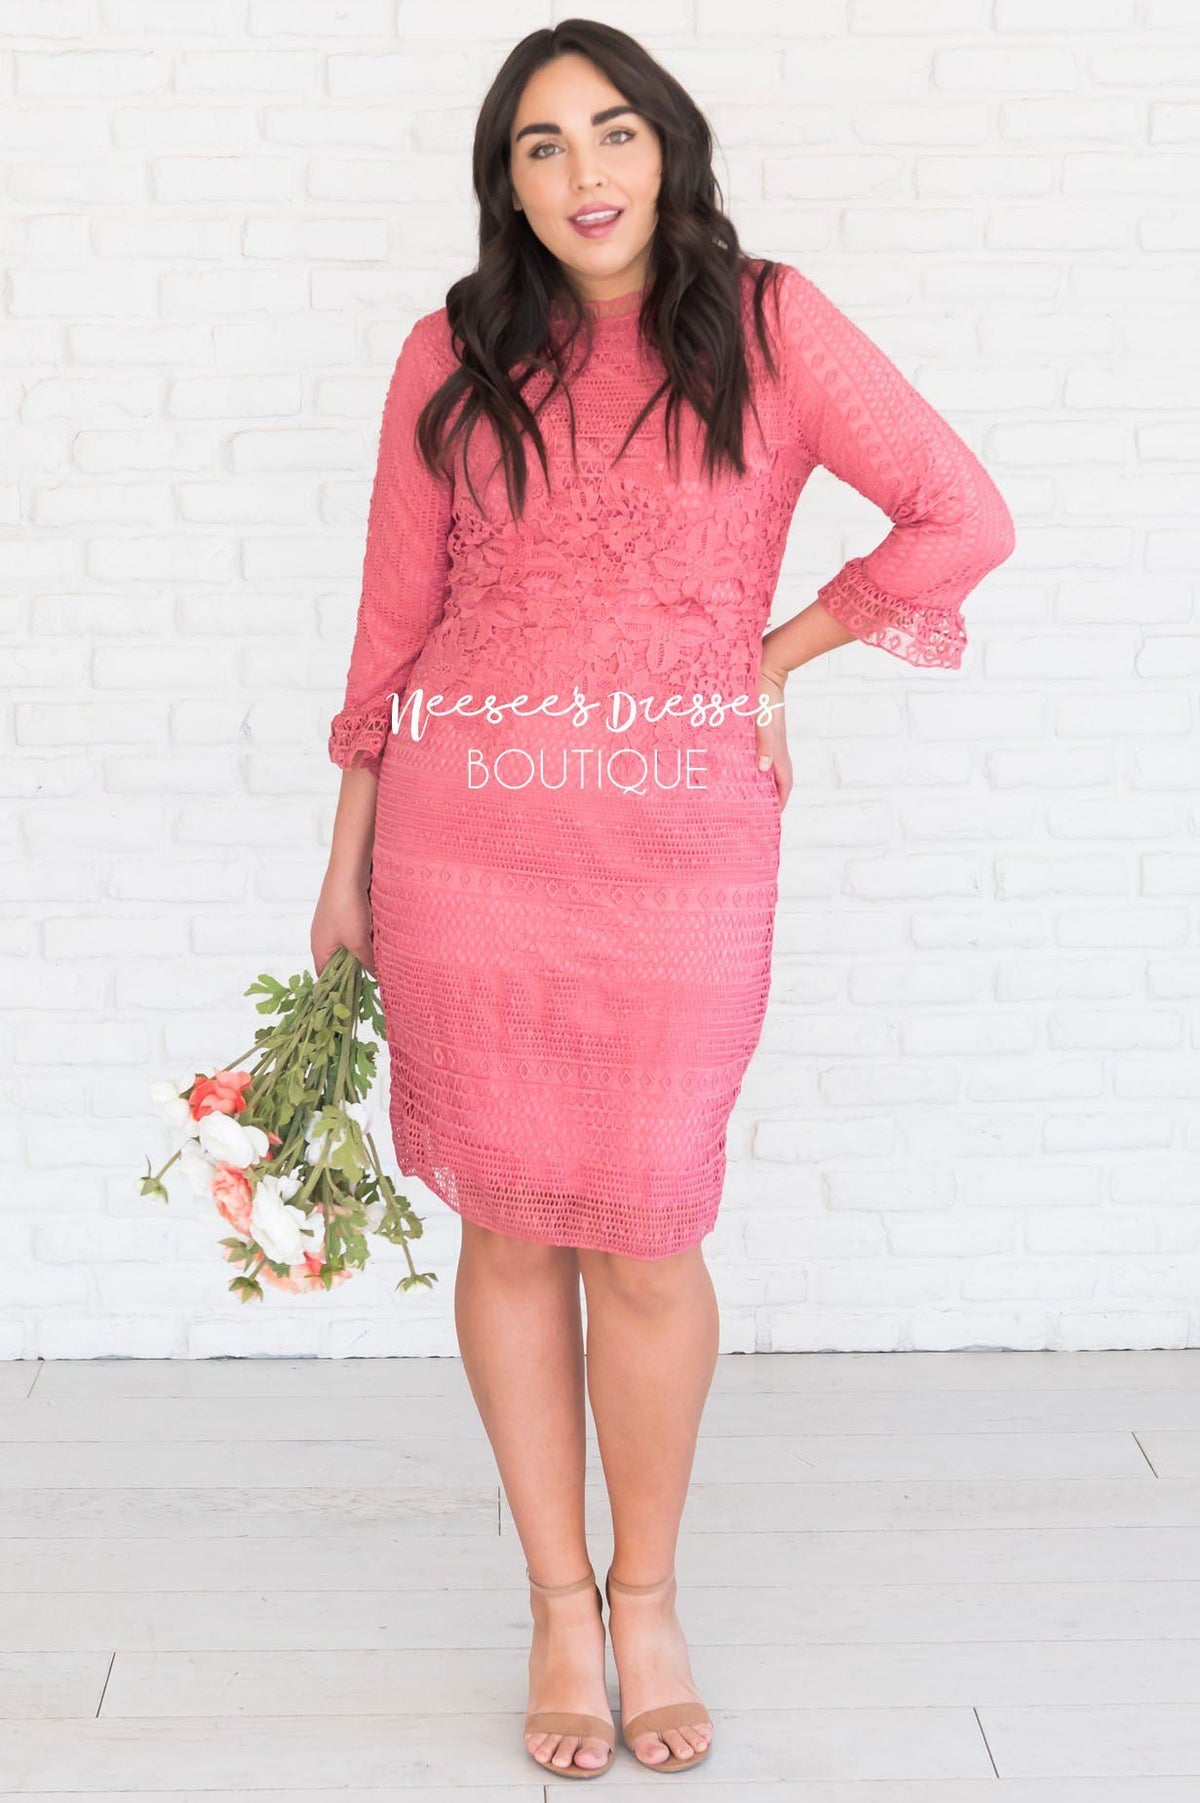 The Ember Lace Mid-Length Dress - NeeSee's Dresses